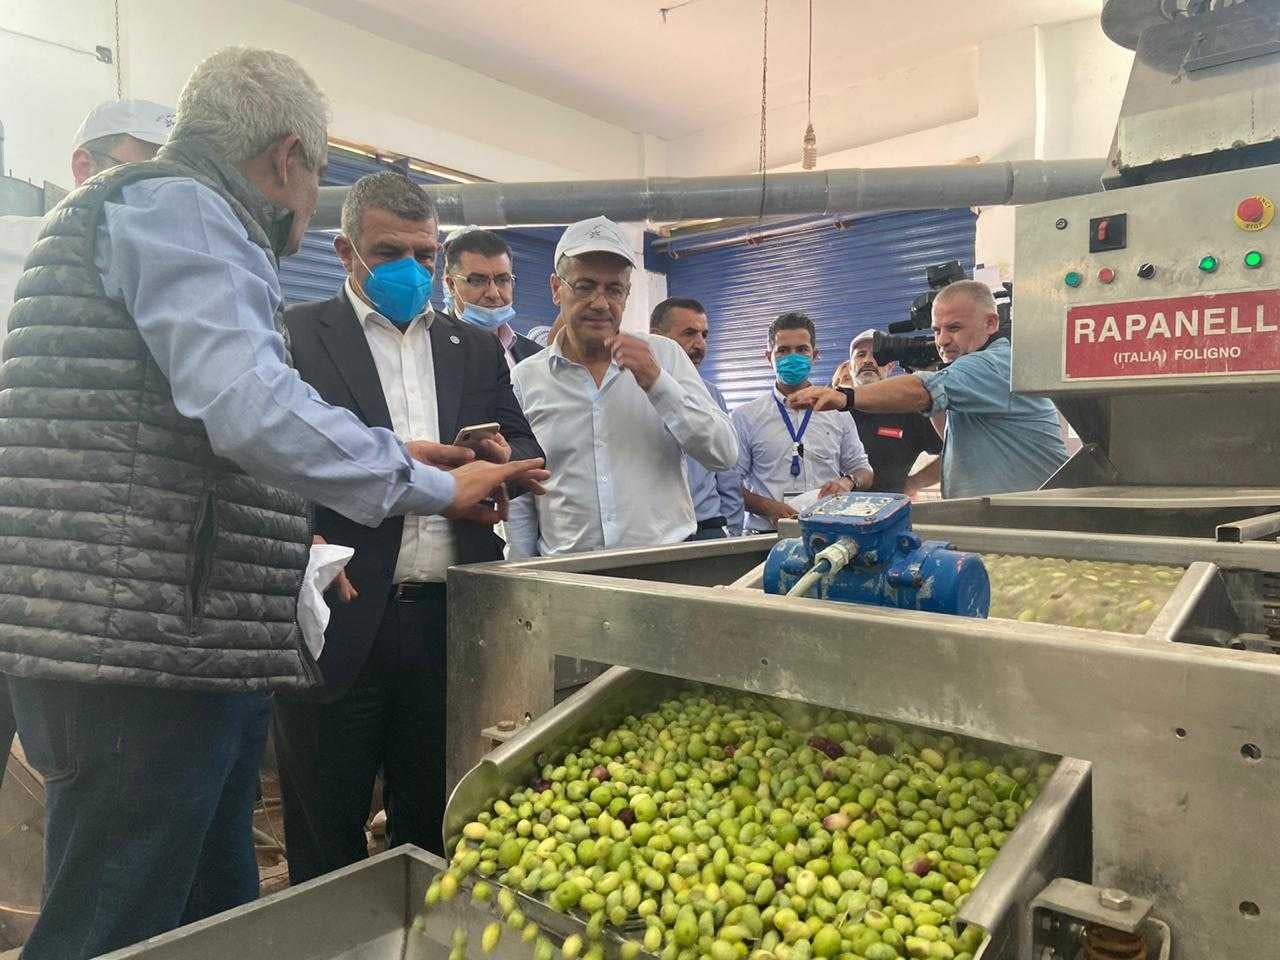 africa-middle-east-competitions-the-best-olive-oils-jordanian-producers-celebrate-firstever-wins-at-world-olive-oil-competition-olive-oil-times